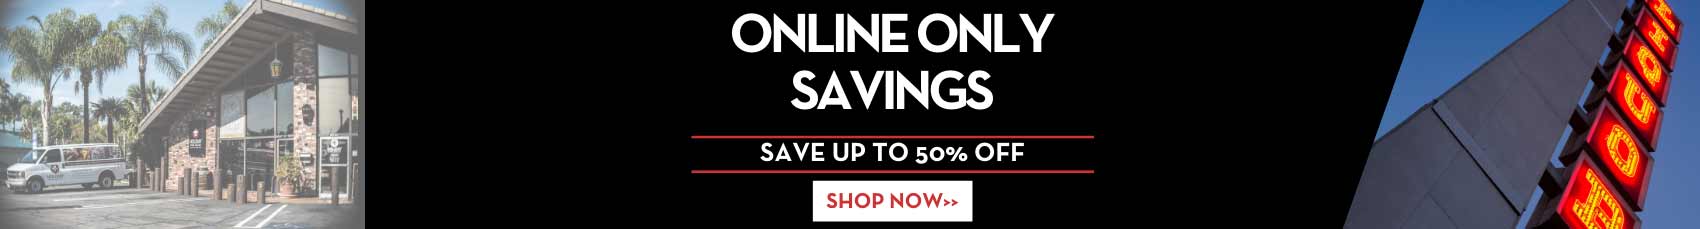 Saving Just Tastes Better - SAVE up to 50% OFF ONLINE ONLY!